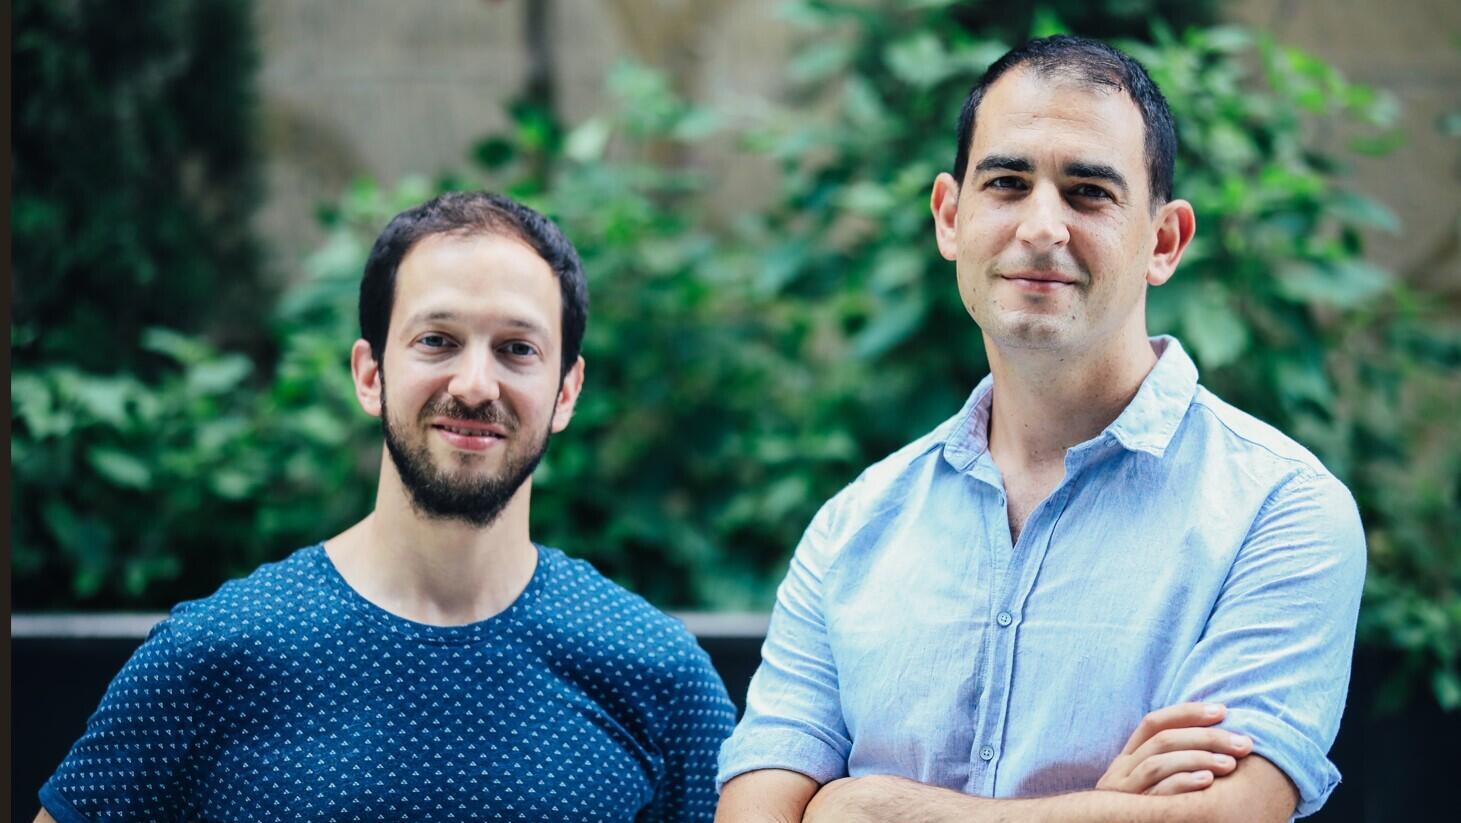 Tomer-Kashi CEO, Ori-Blumenthal co-founder and CTO of the company